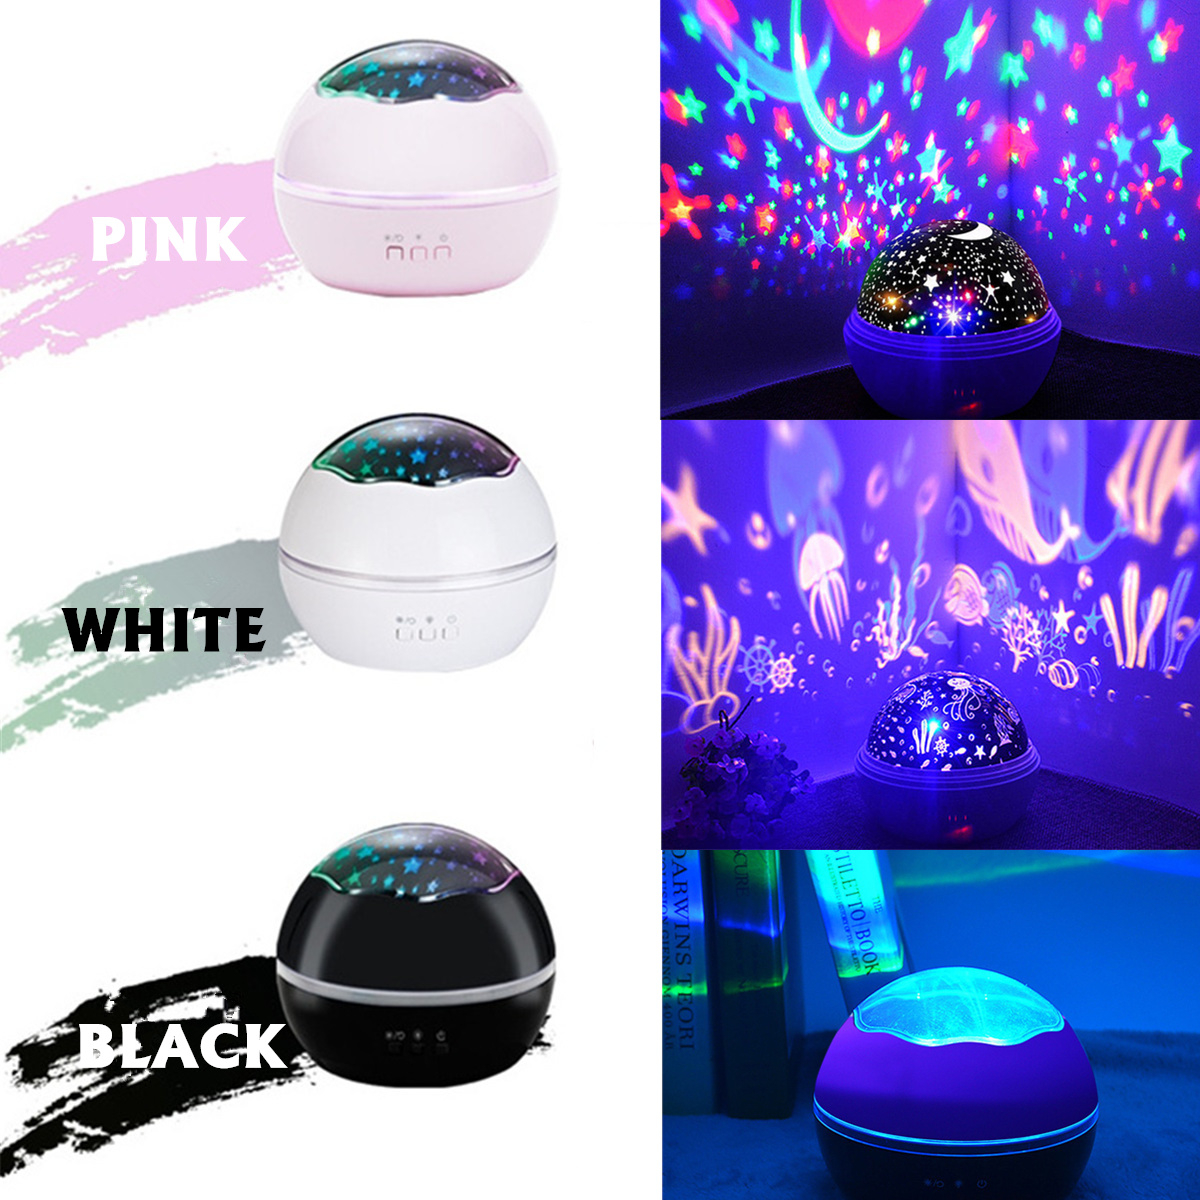 

LED Rotation Cosmos Ocean Sky Starry Star Projector Night Light Bed Lamp Gifts